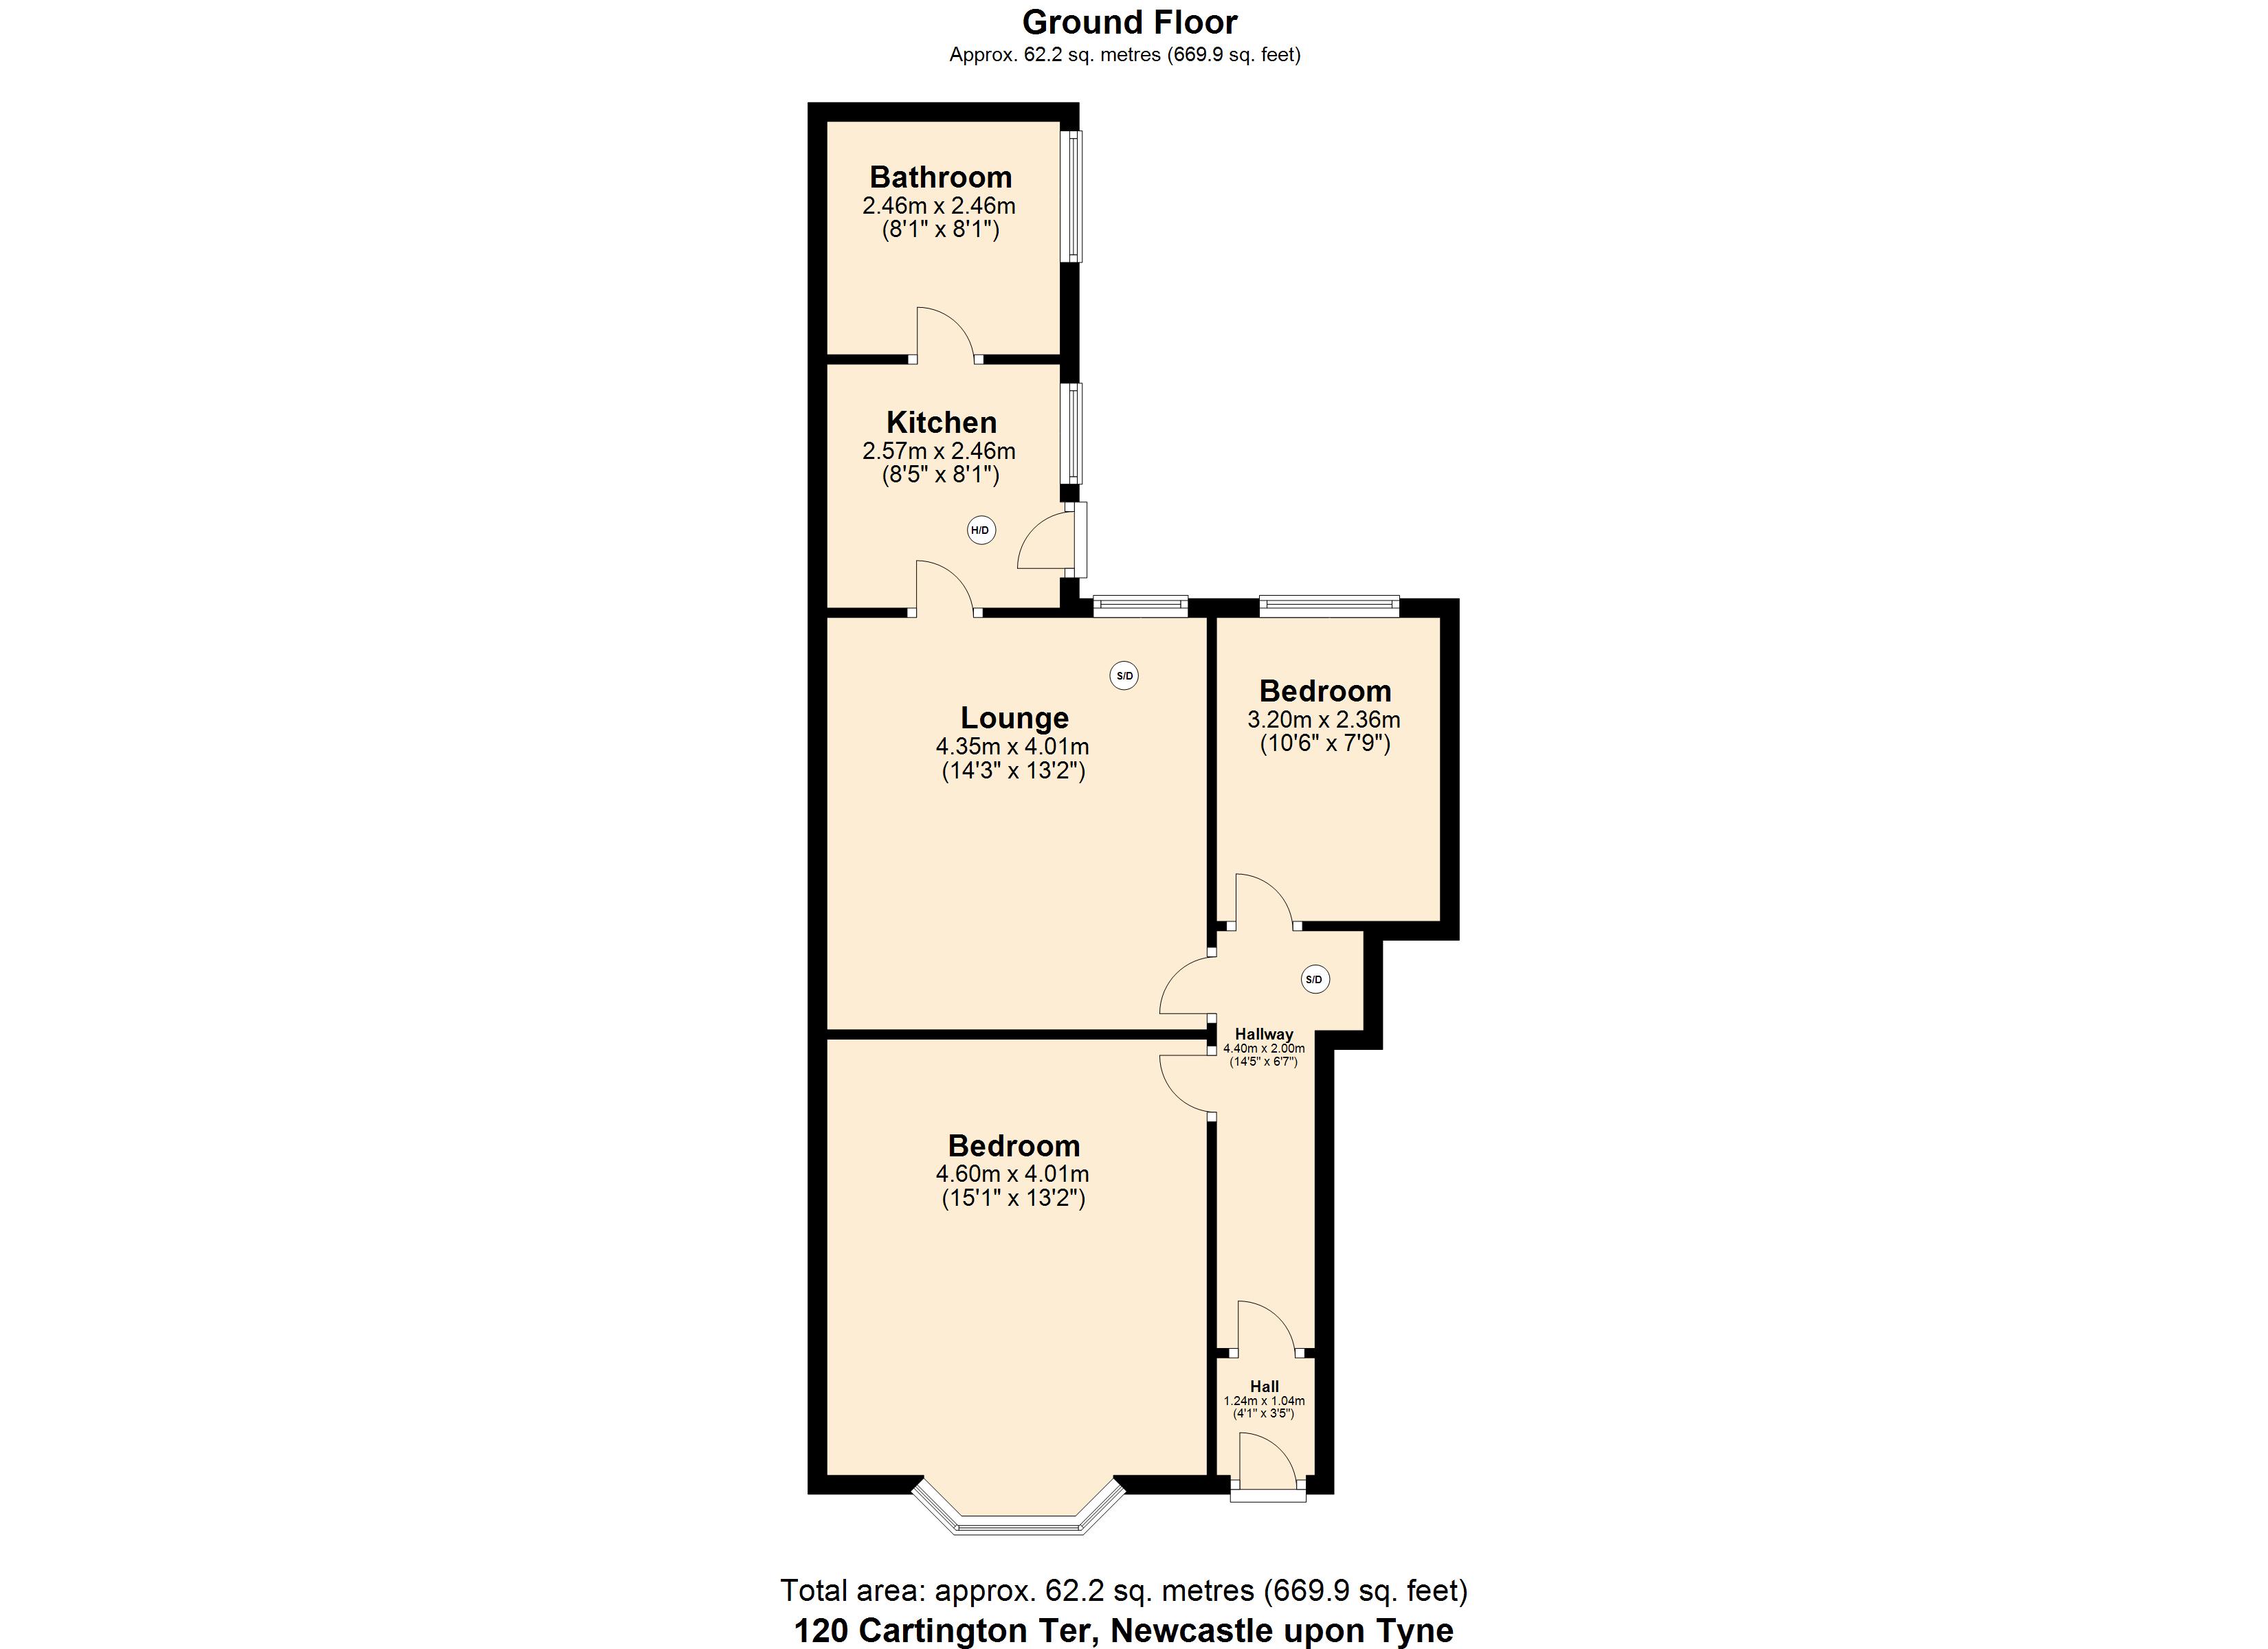 2 bed flat to rent in Cartington Terrace, Newcastle upon tyne - Property floorplan